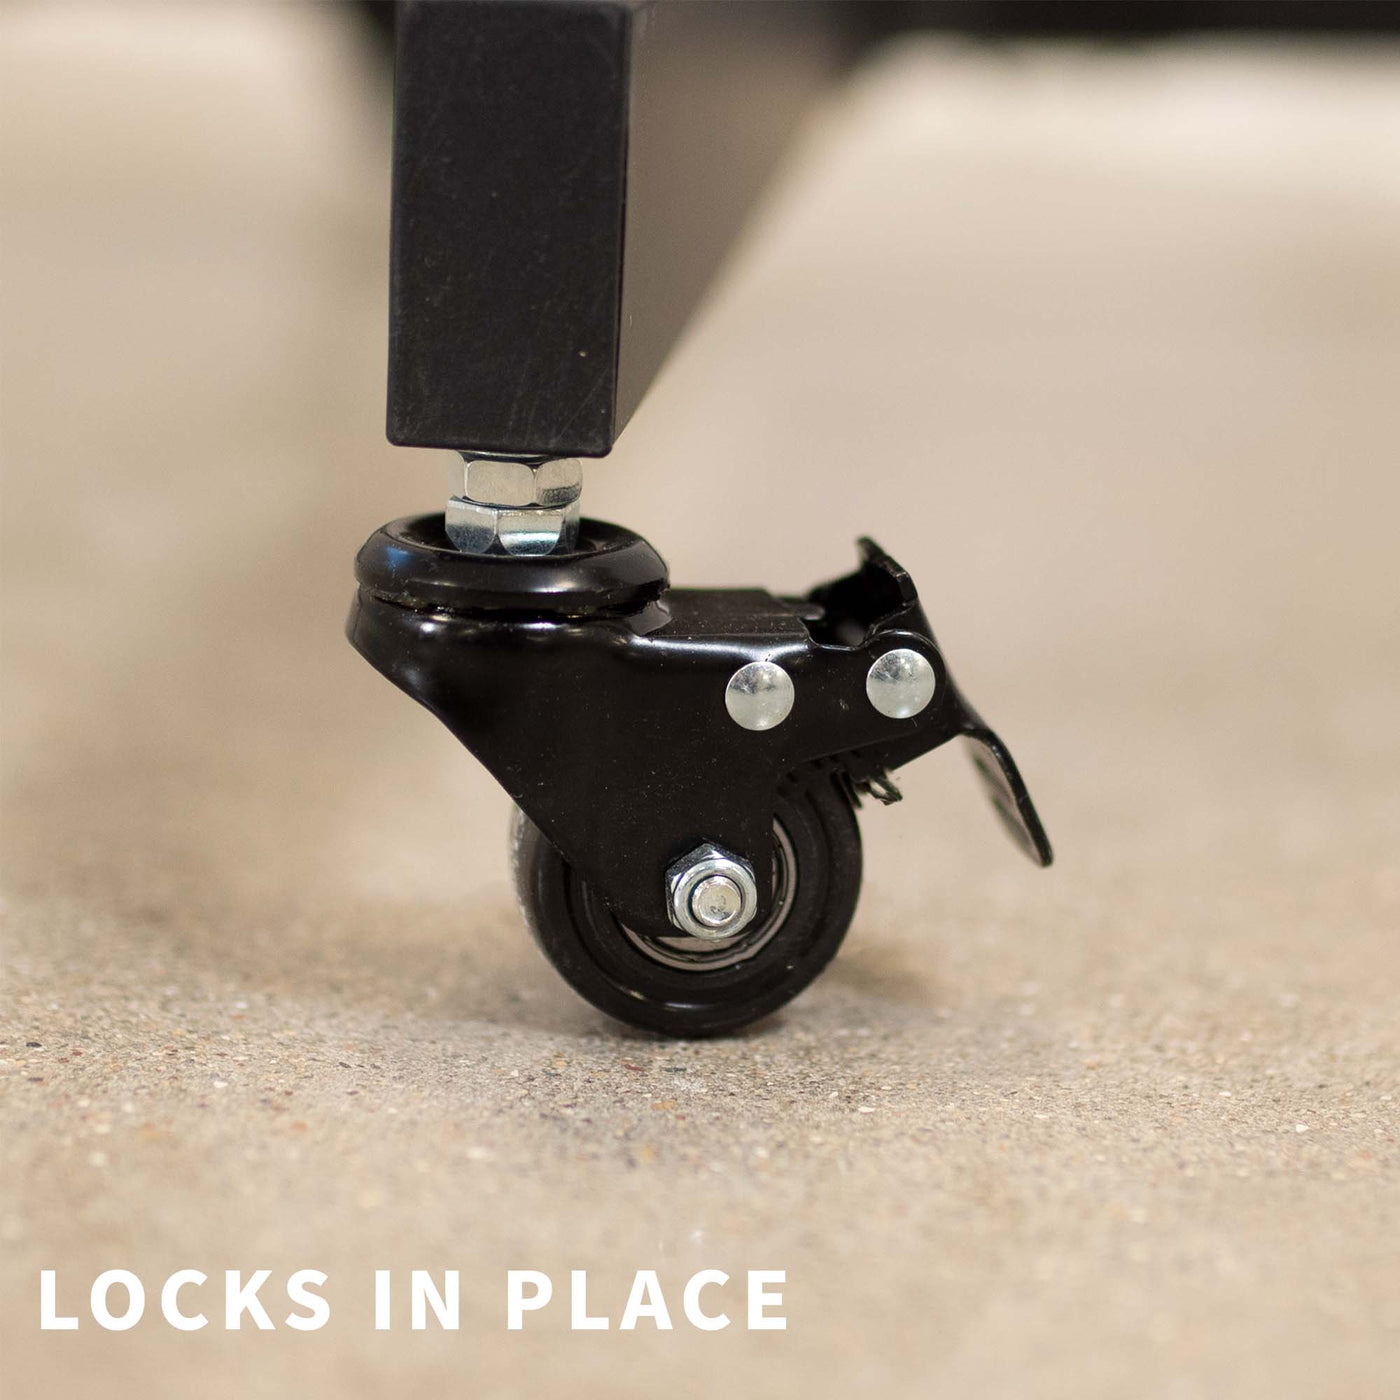 Lock cart in place with locking caster wheels.